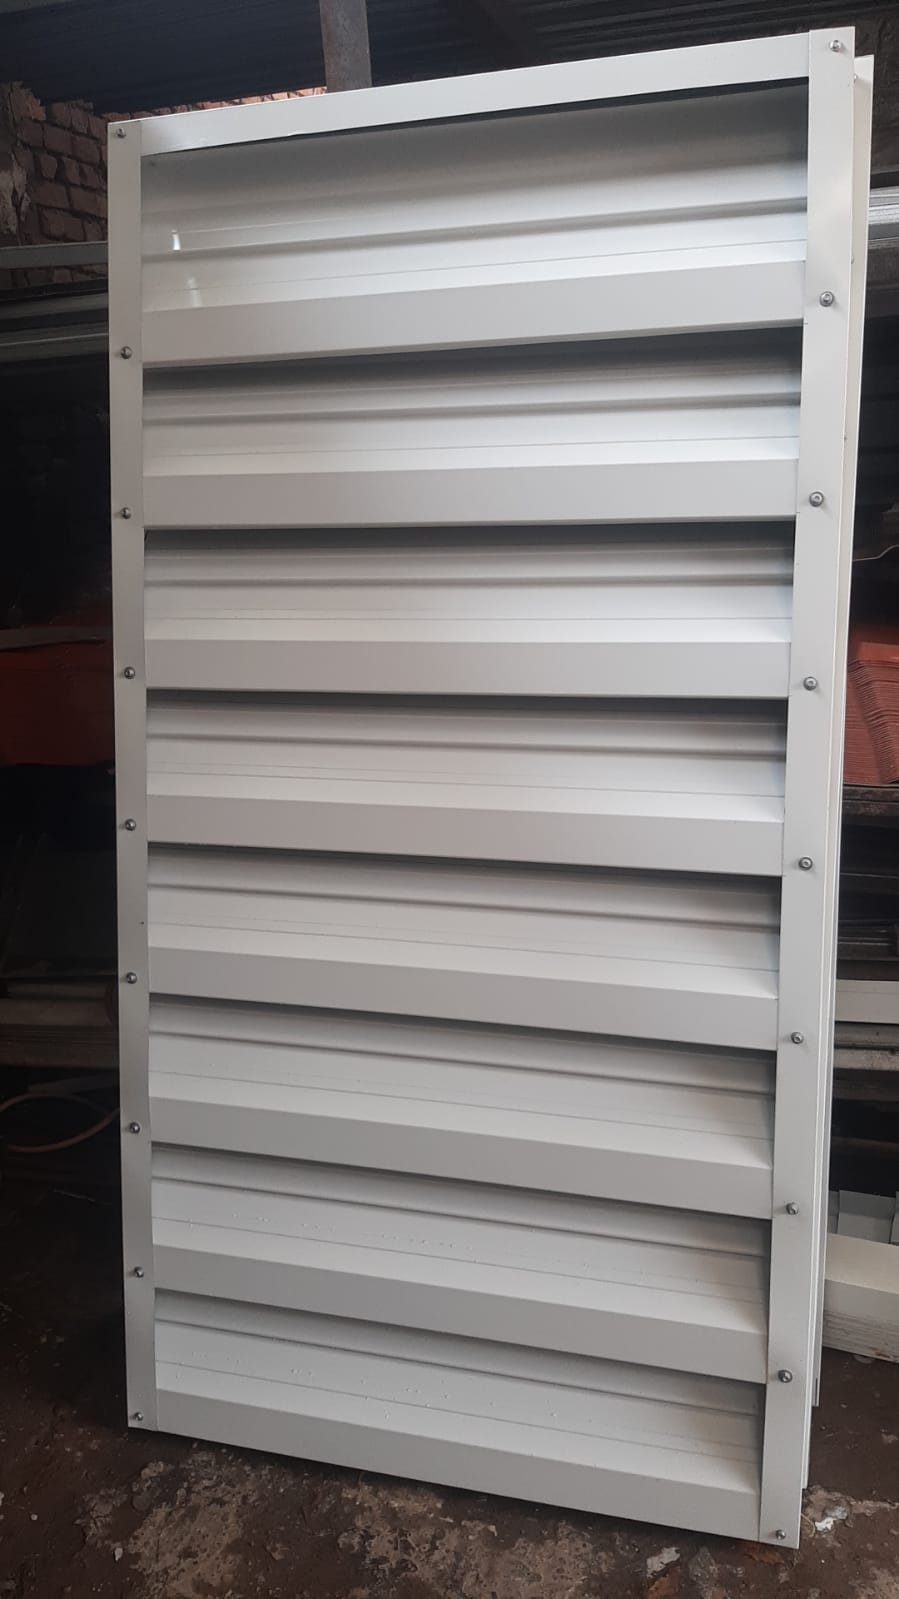 Louvre Supplier in Punjab | Mansarovar Products & Services | louver window suppliers in Ludhiana, ventilator louver suppliers in Amritsar, ventilator louver suppliers in Patiala, ventilator louver suppliers in Hoshiyarpur, Louvre supplier in Bathinda - GL116833